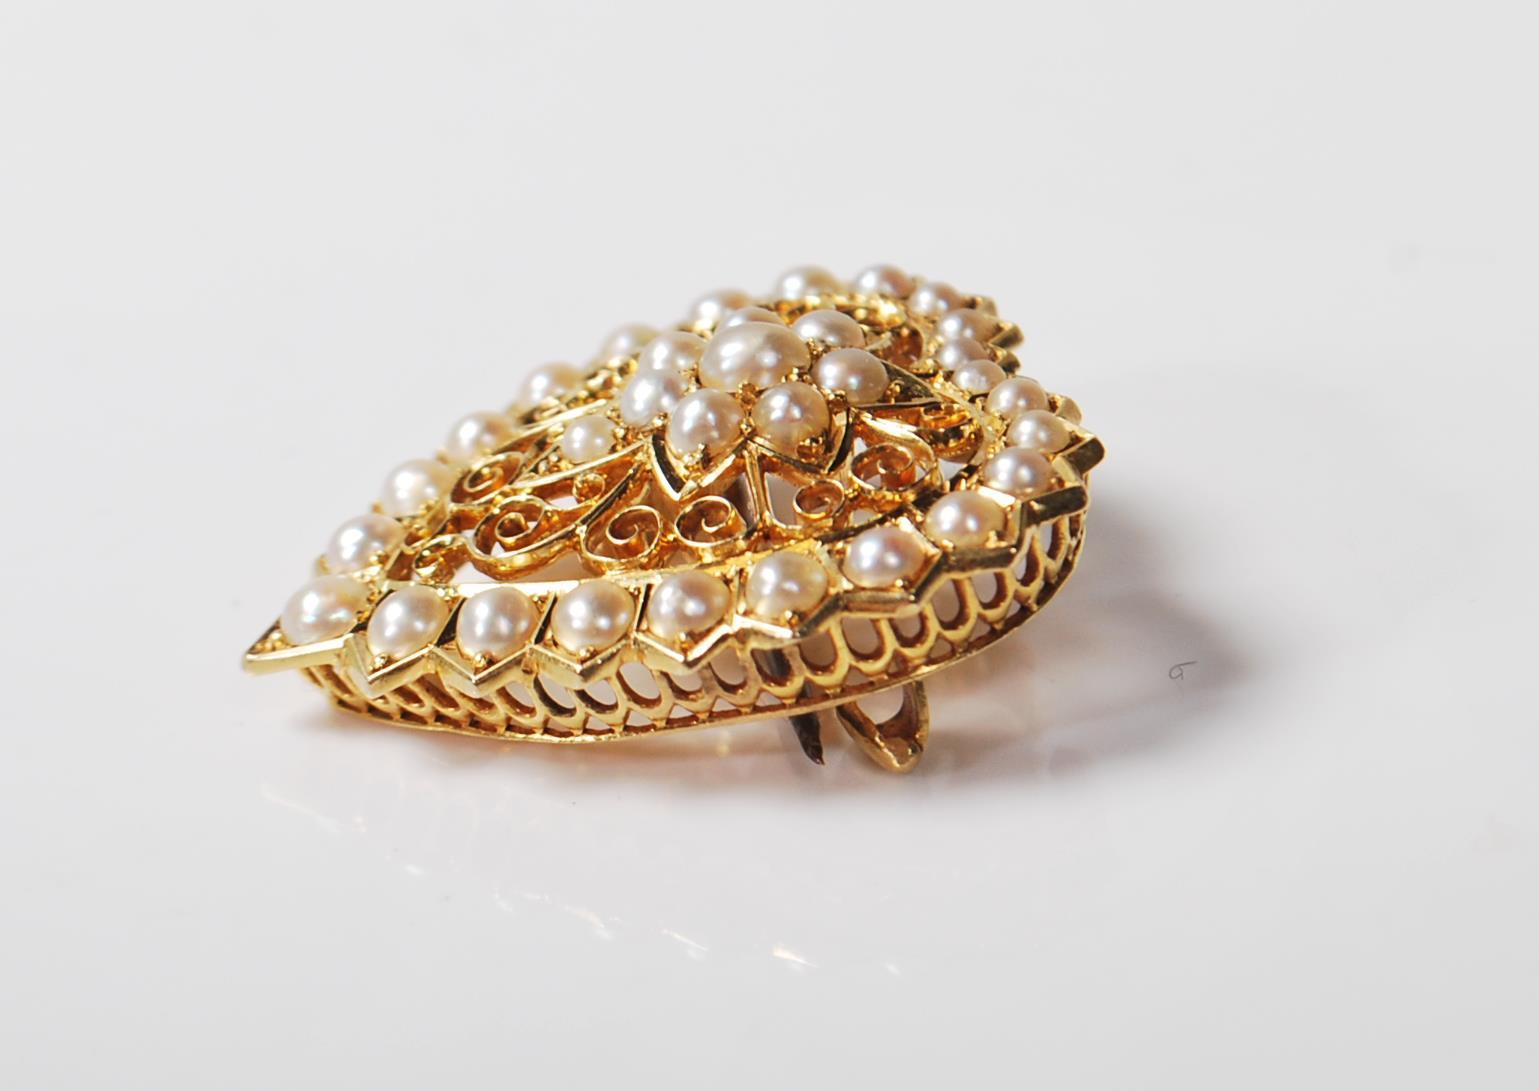 ANTIQUE 18CT GOLD AND SEED PEARL HEART BROOCH - Image 5 of 7